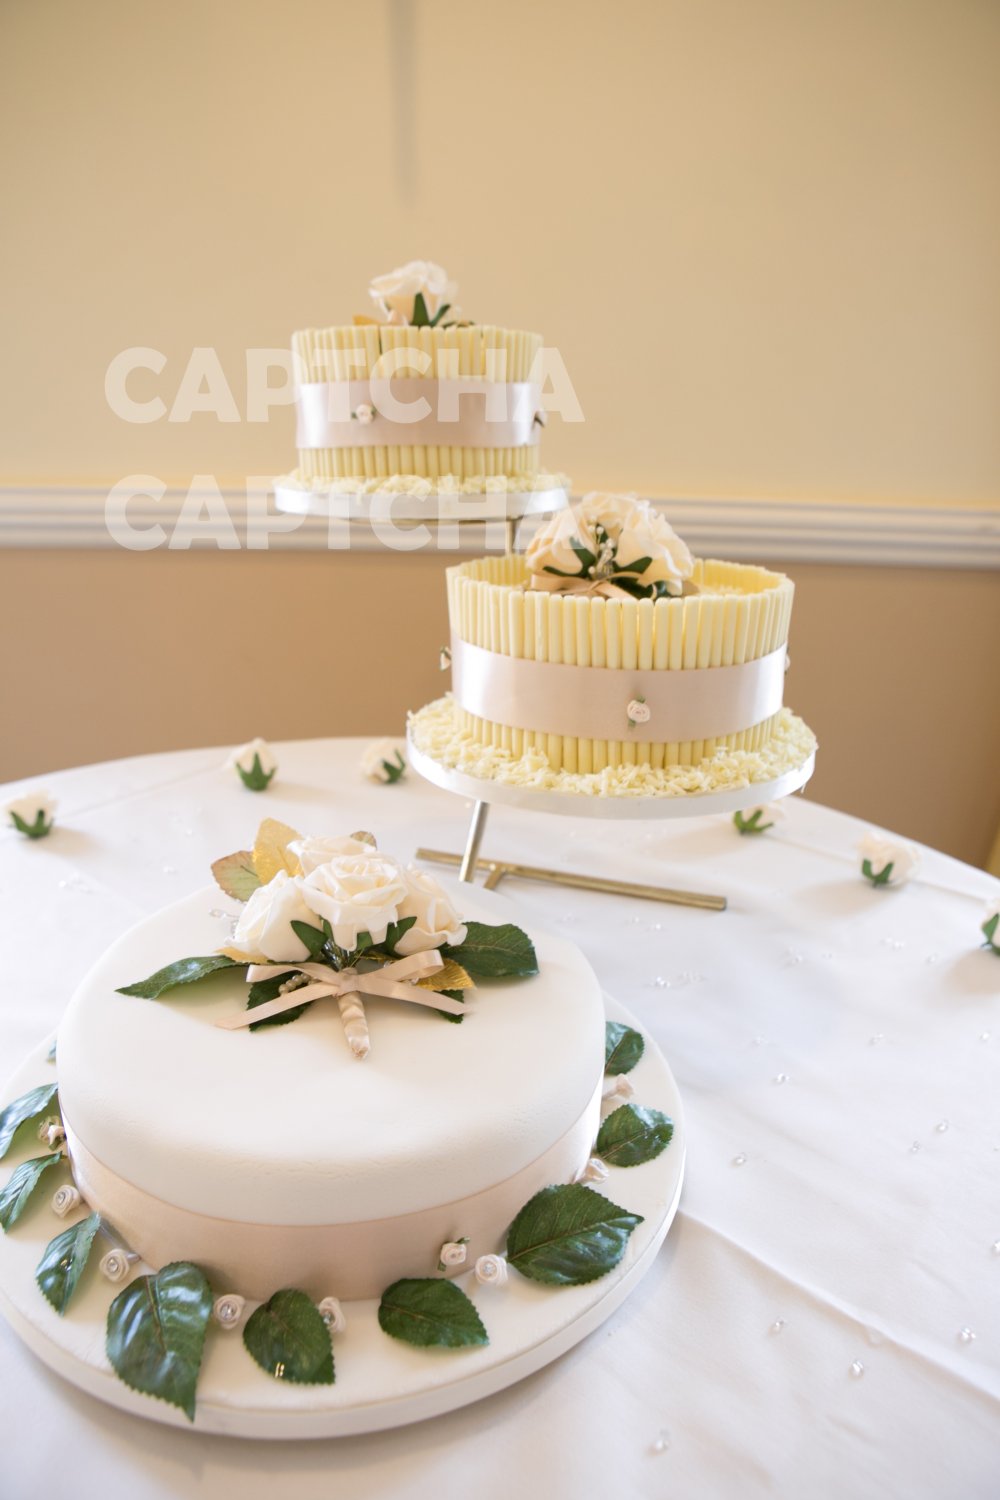 Wedding Cakes - making it personal to you! 